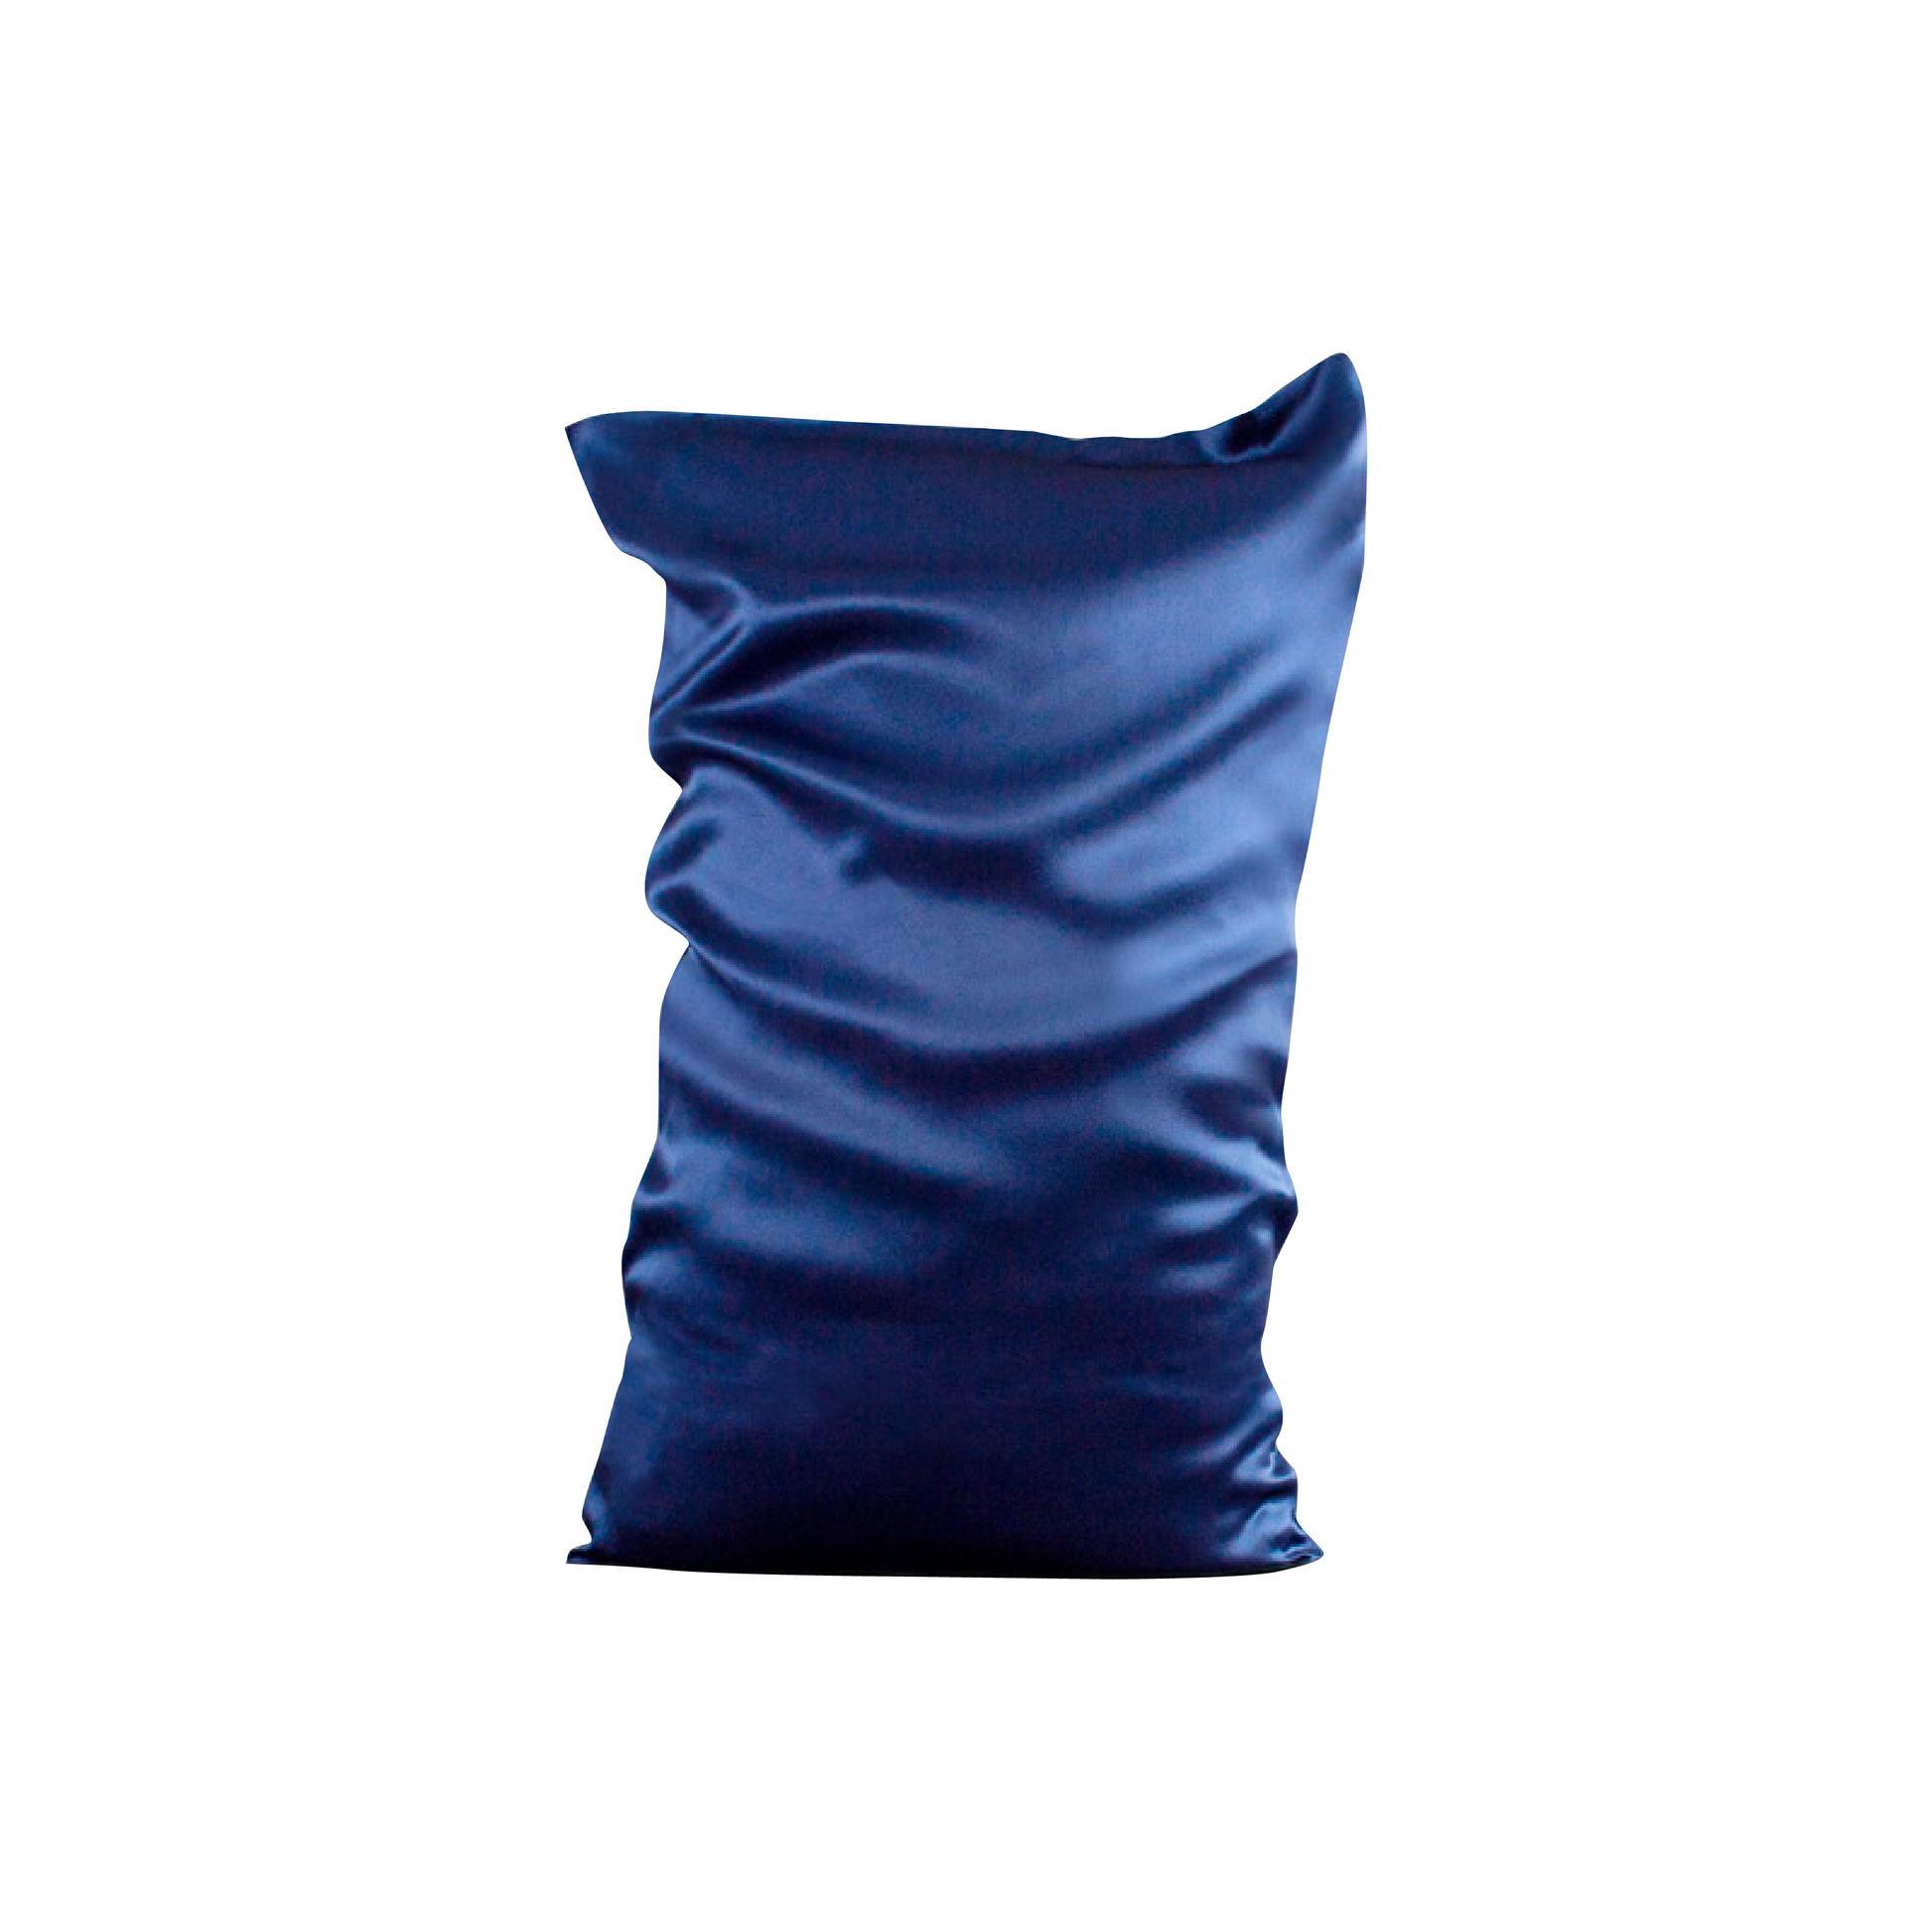 White Trousseau's 100% 22 Momme Mulberry Silk Pillowcase in Navy Blue. Made of OEKO-TEX® certified, organic mulberry silk, our double-sided pillowcase is specially made to stop hair loss and hair breakage, and to help you sleep better and faster. Look no further for the best mulberry silk pillowcase in Singapore.